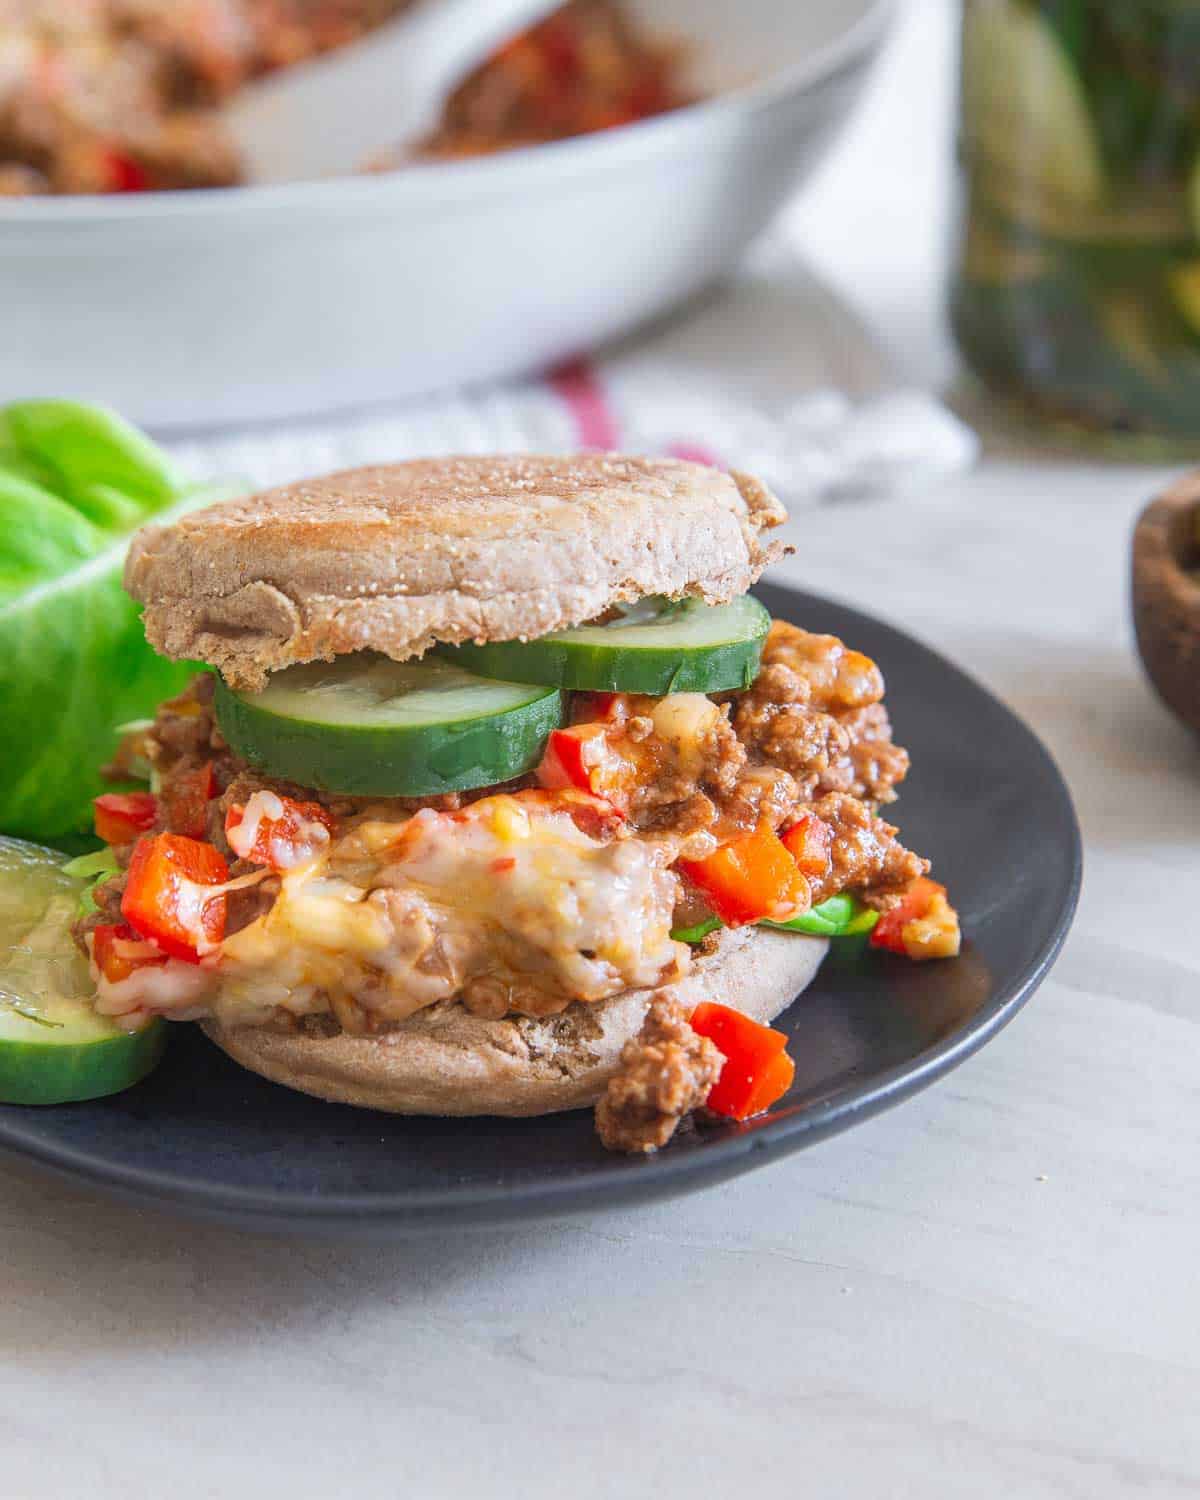 A healthy version of the traditional sloppy joe recipe so you can indulge without the guilt.